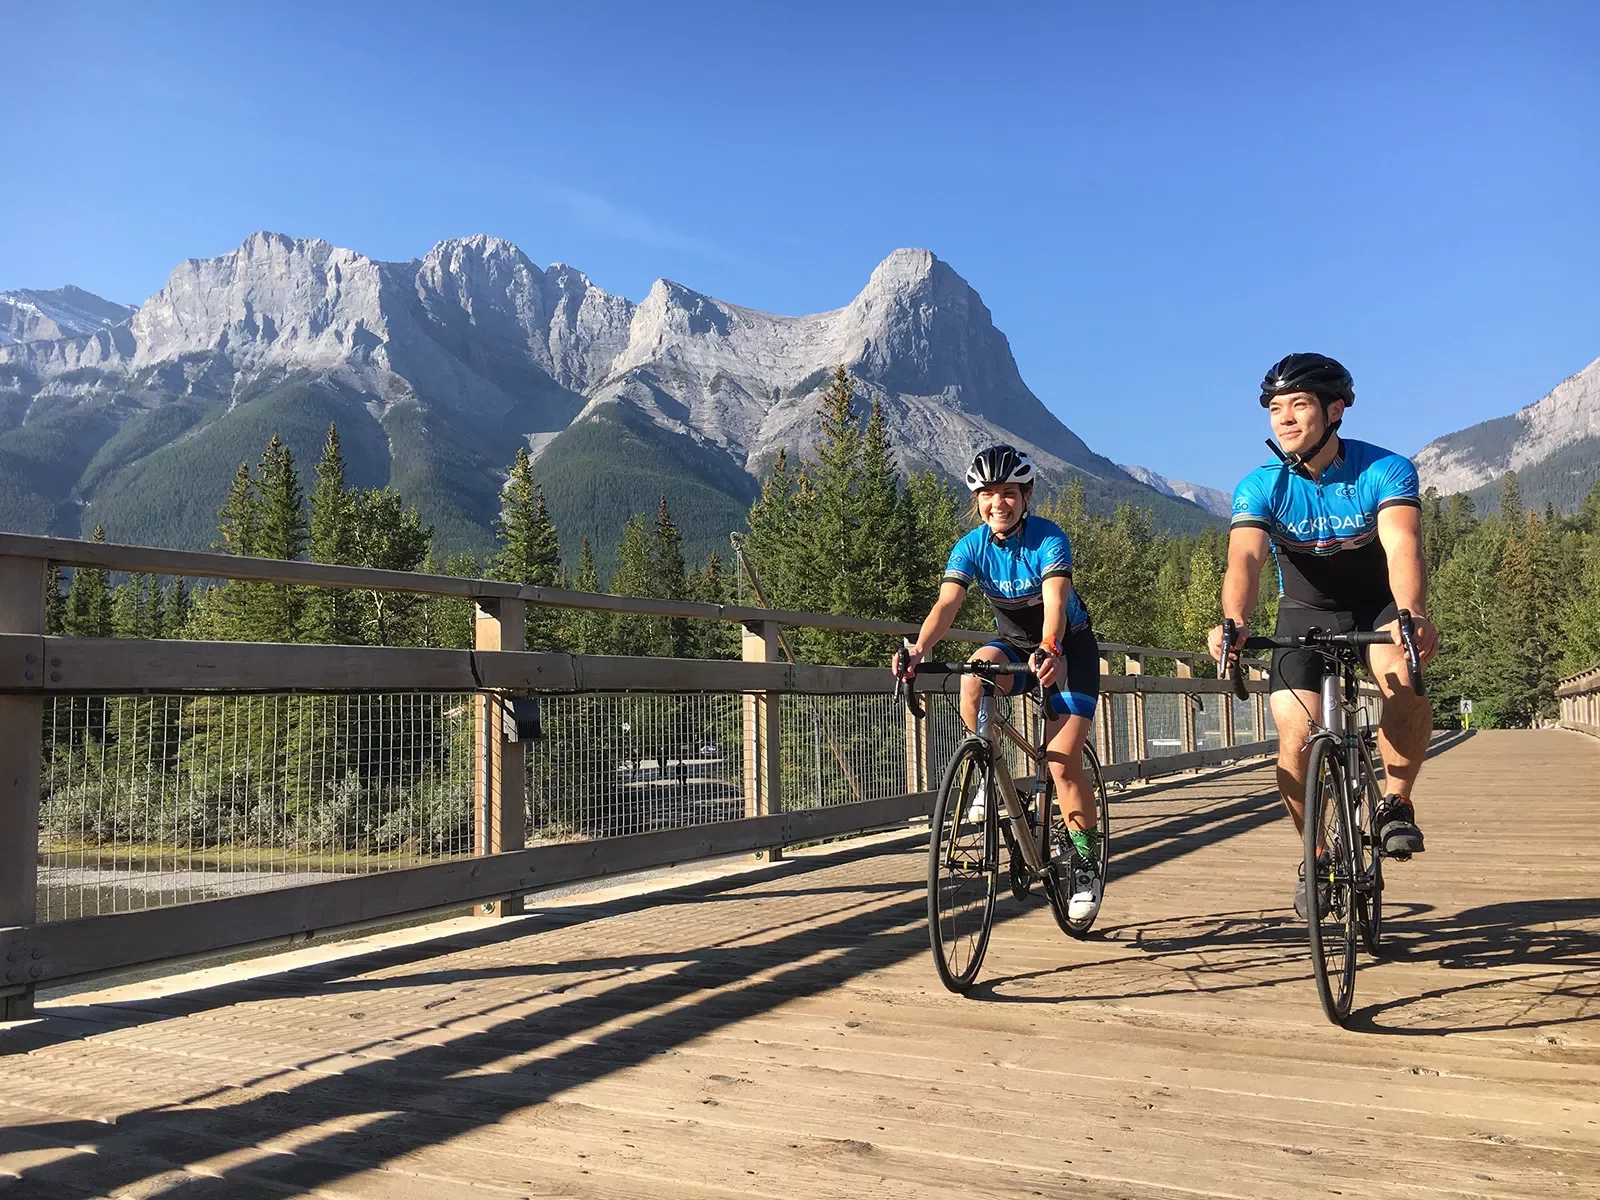 Two guests cycling on wooden path, Rockies in distance.